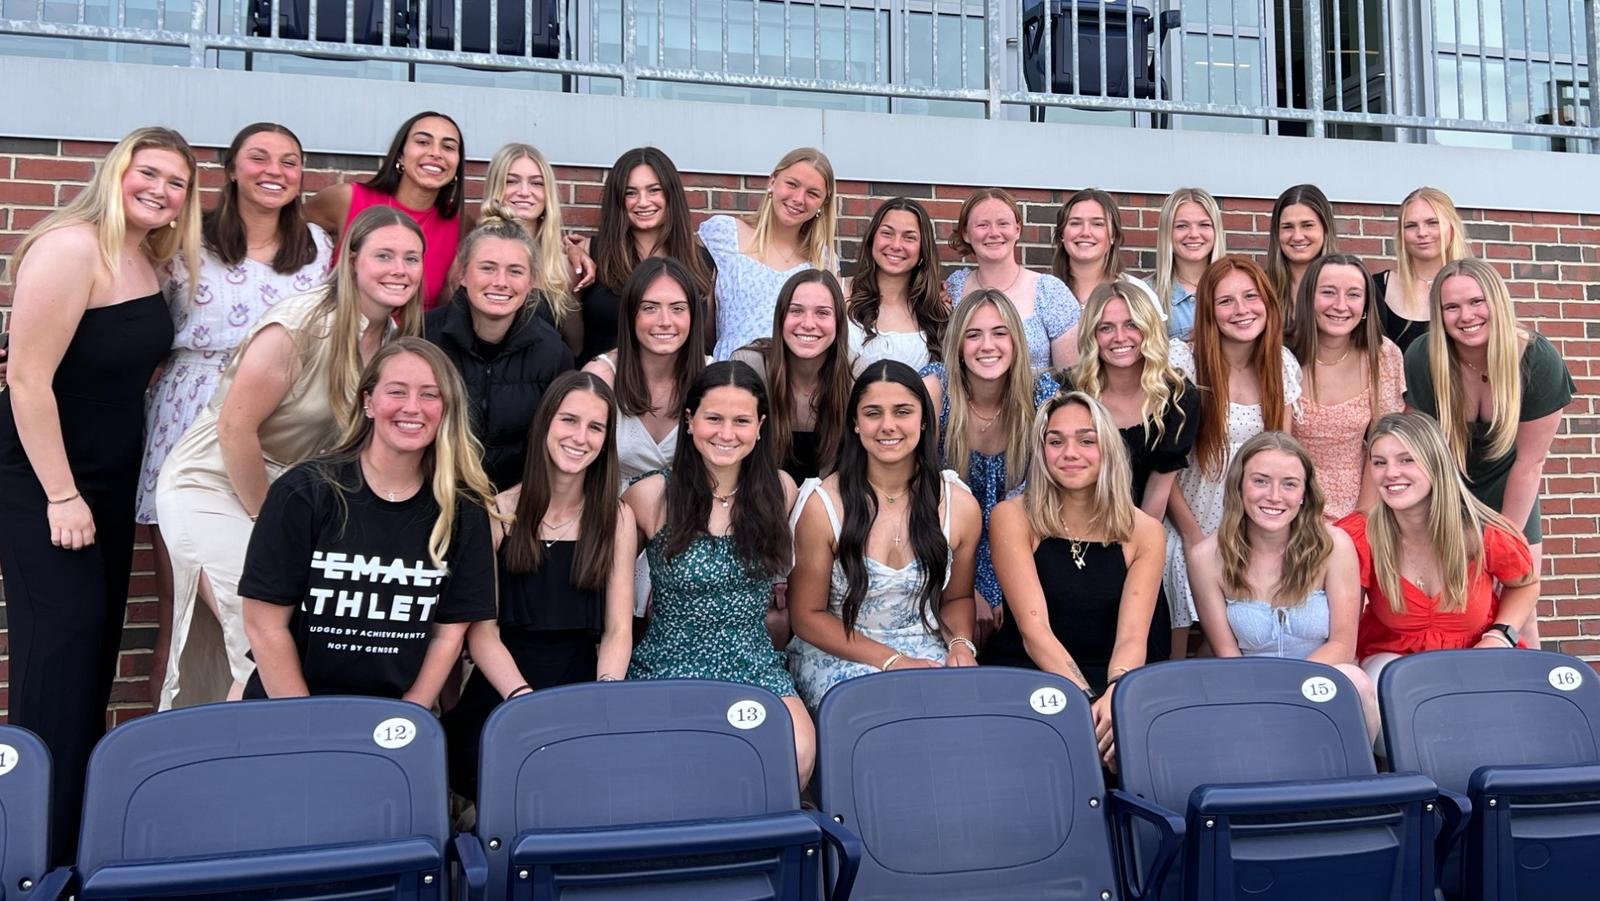 Women’s Soccer Hosts Annual Banquet and Distributes Team Awards